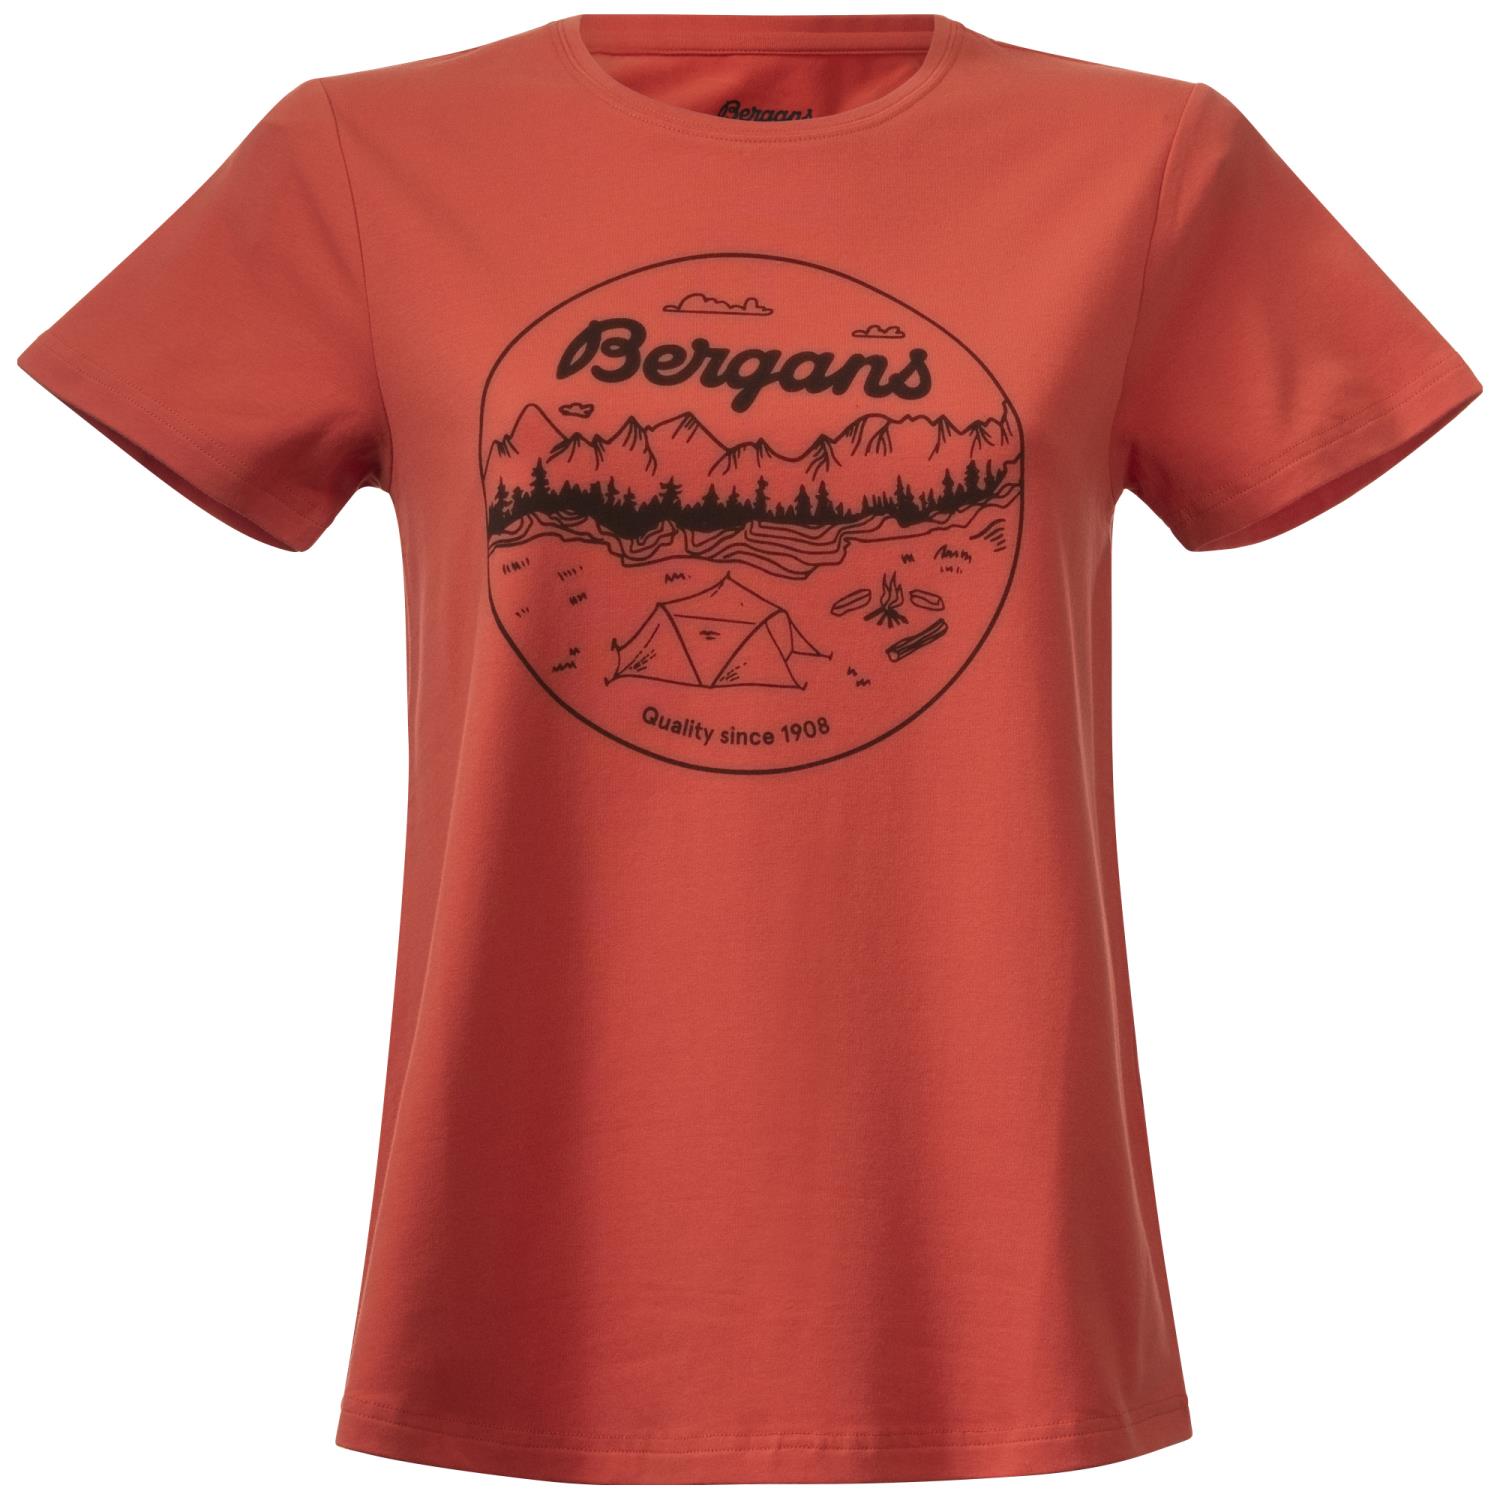 Bergans Graphic W Tee Brick/Solid Charcoal